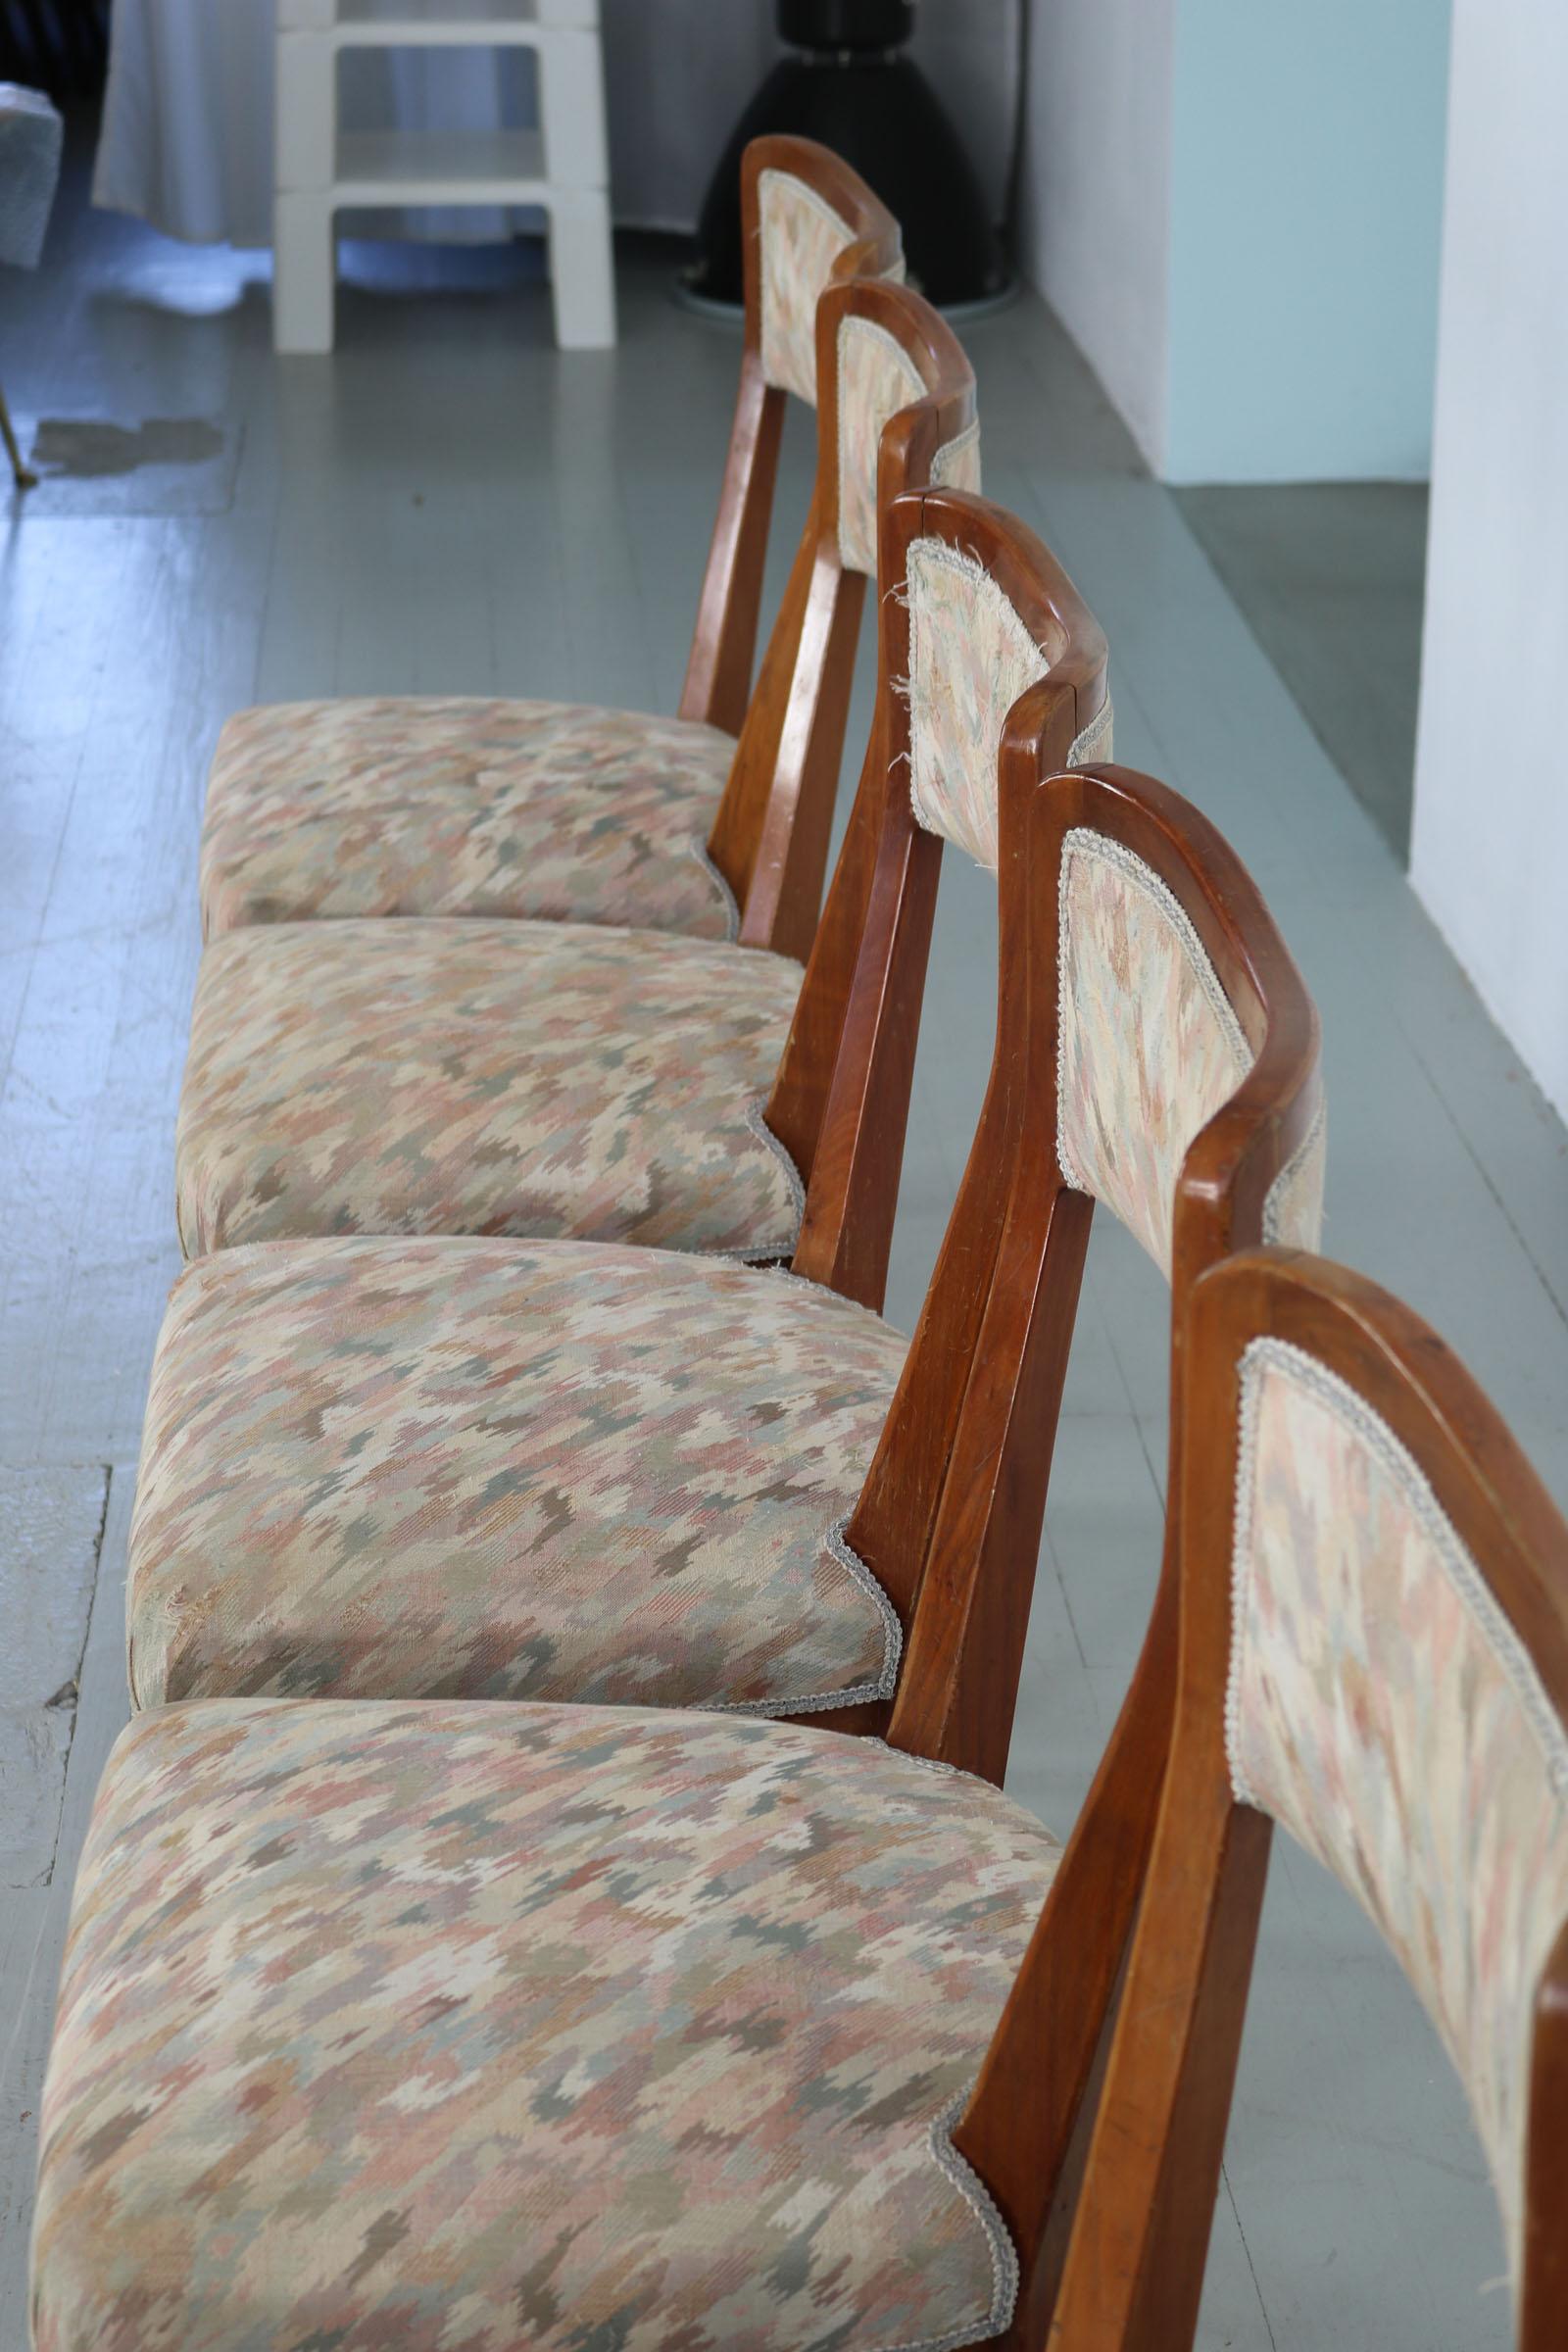 Set of 6 Melchiorre Bega Chairs Made of Cherrywood, Italy, 1950s For Sale 12